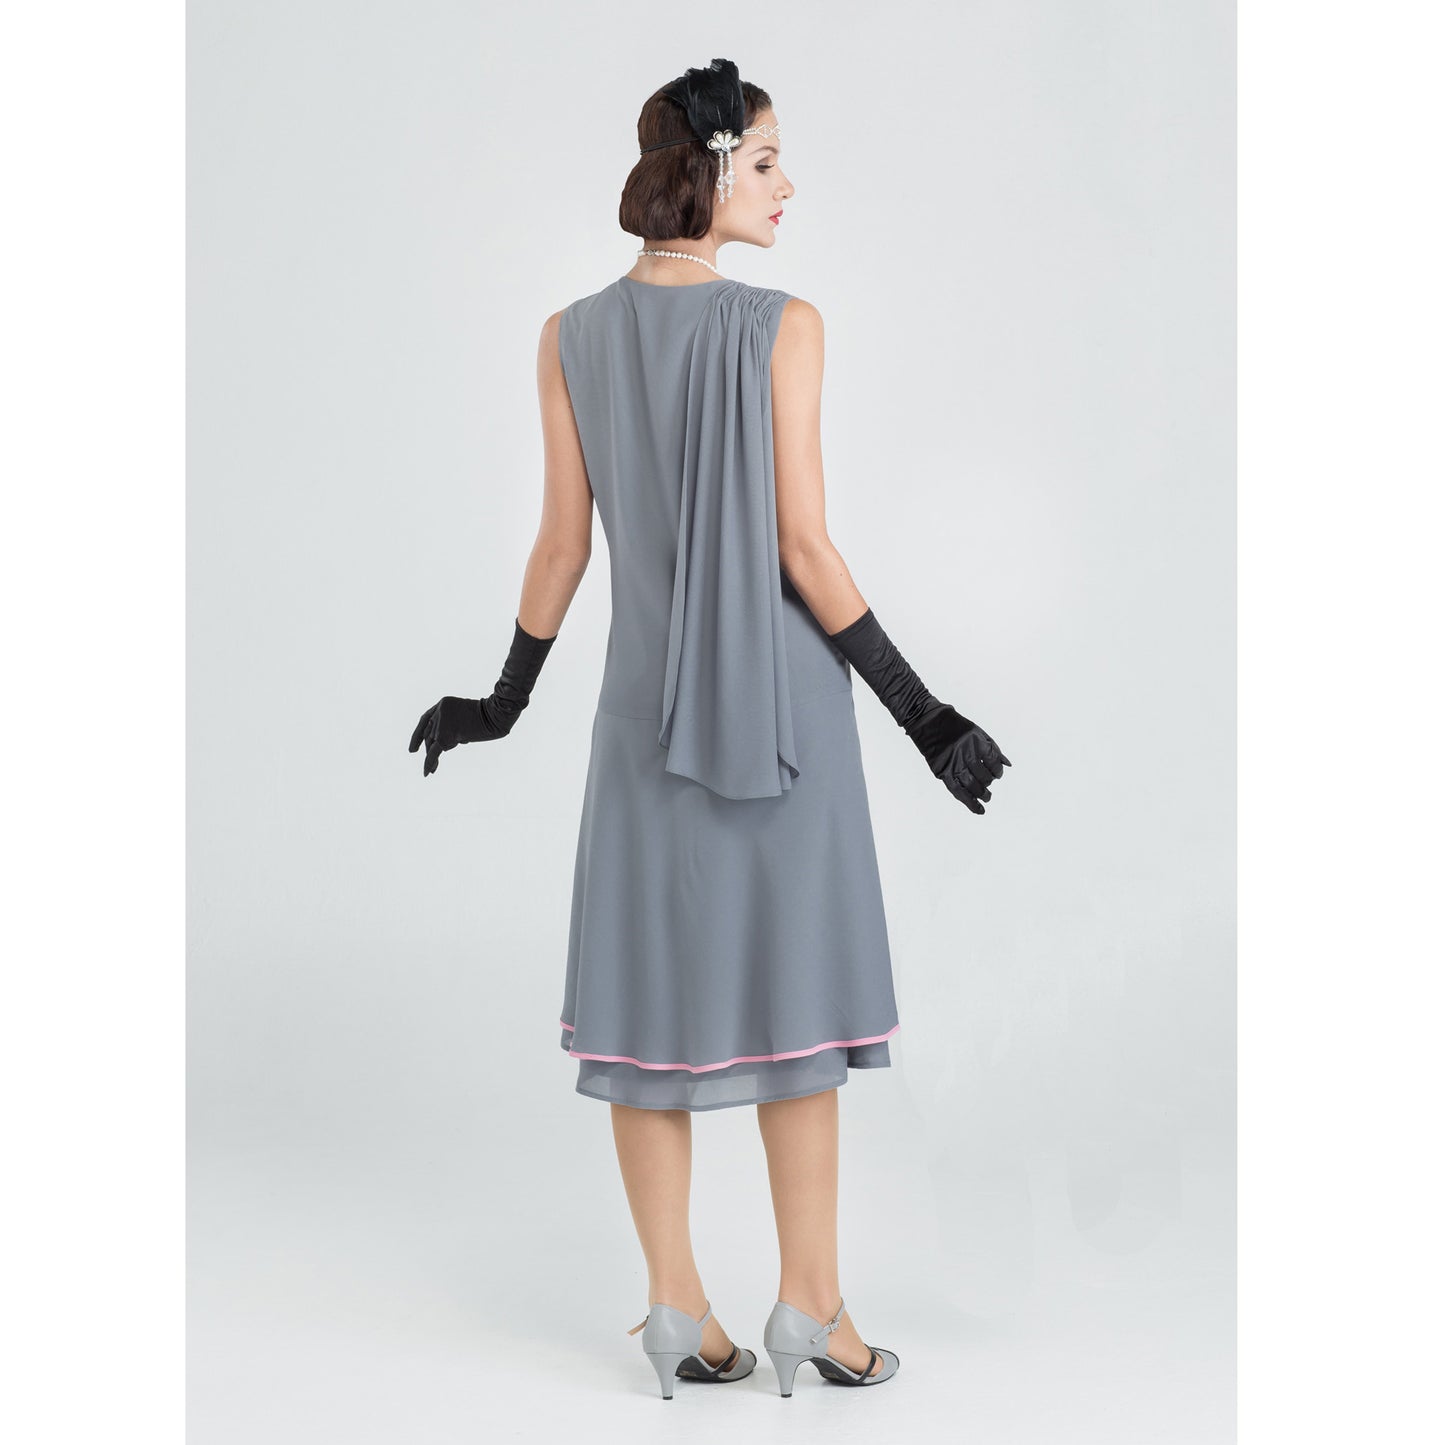 Grey chiffon 1920s Jazz Age party dress, or Great Gatsby dress or Flapper, with train on the shoulder and decorative pink floral embroidery